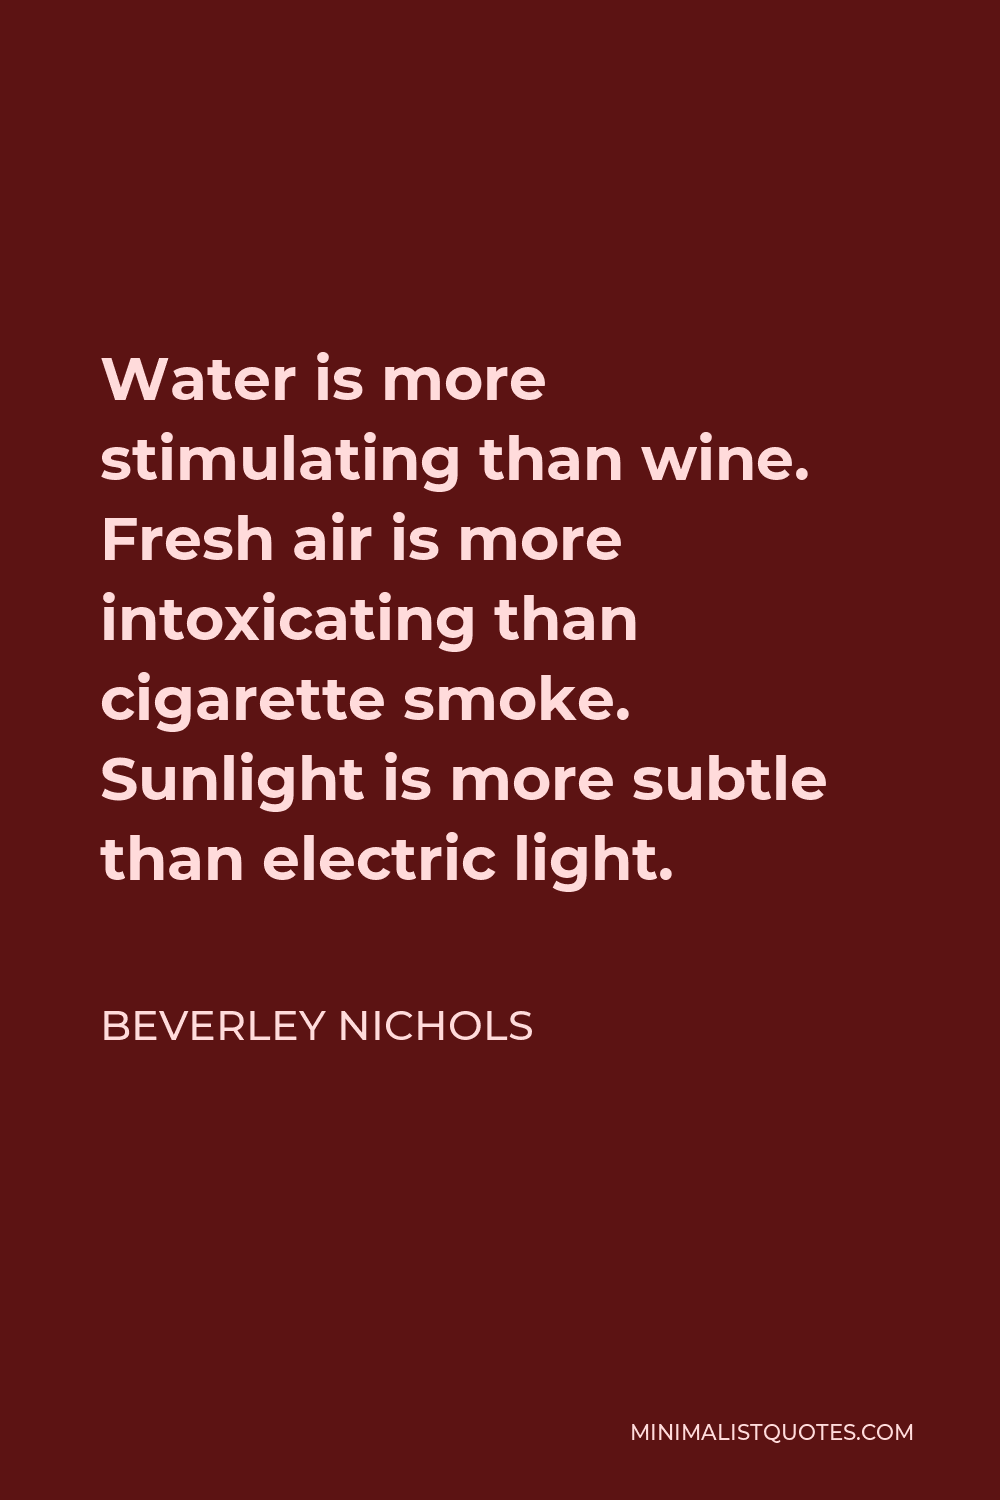 Beverley Nichols Quote - Water is more stimulating than wine. Fresh air is more intoxicating than cigarette smoke. Sunlight is more subtle than electric light.